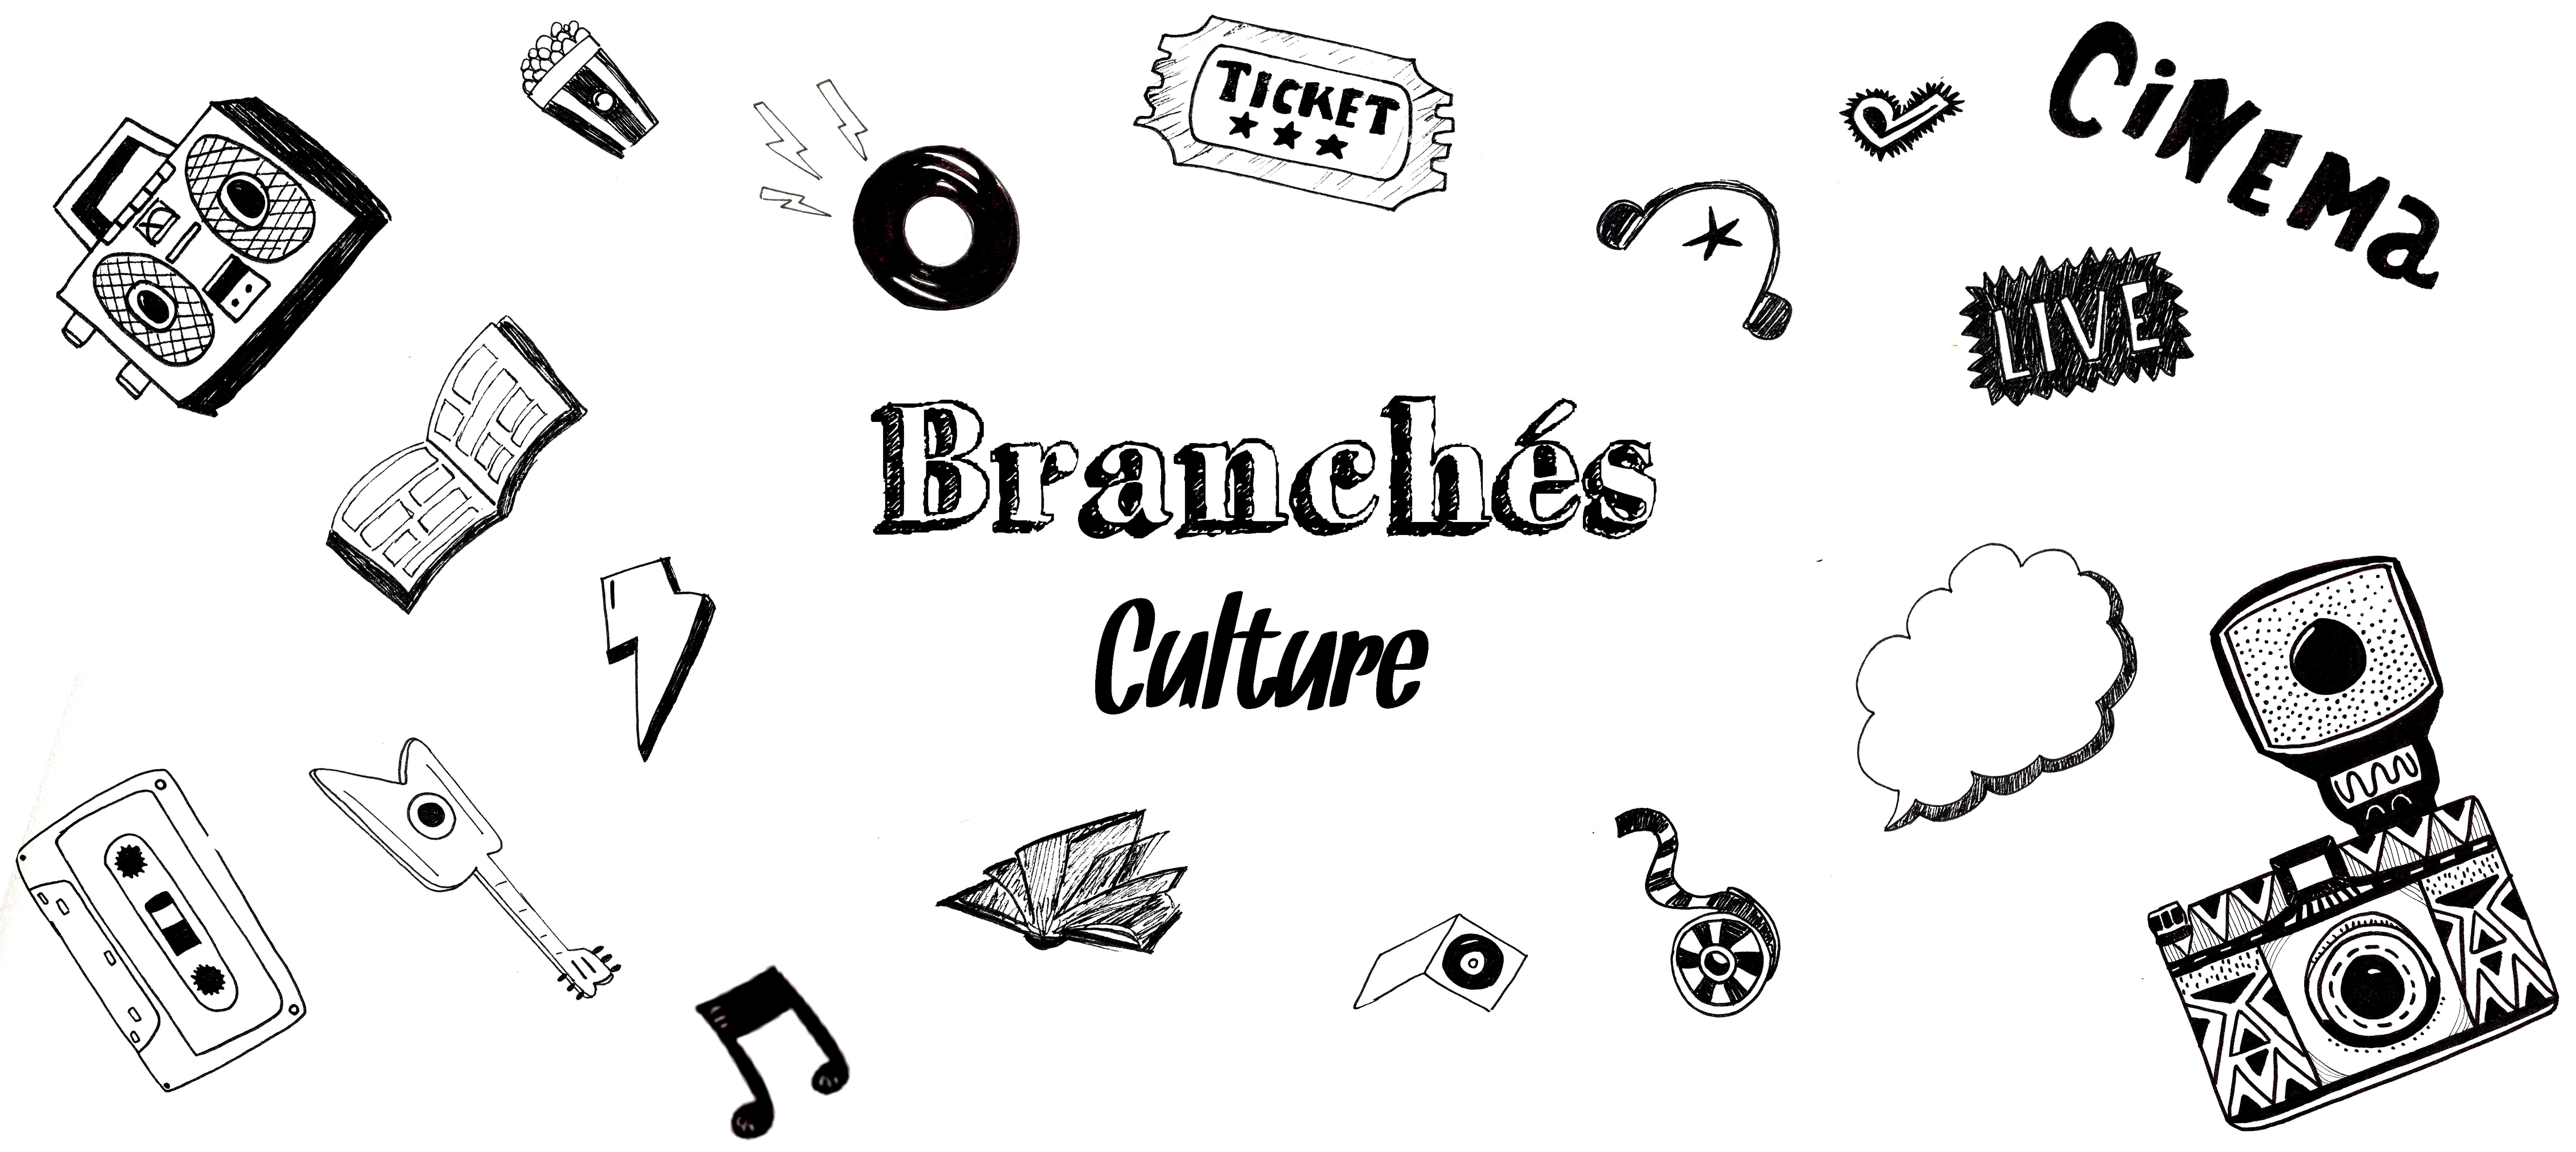 Branches culture